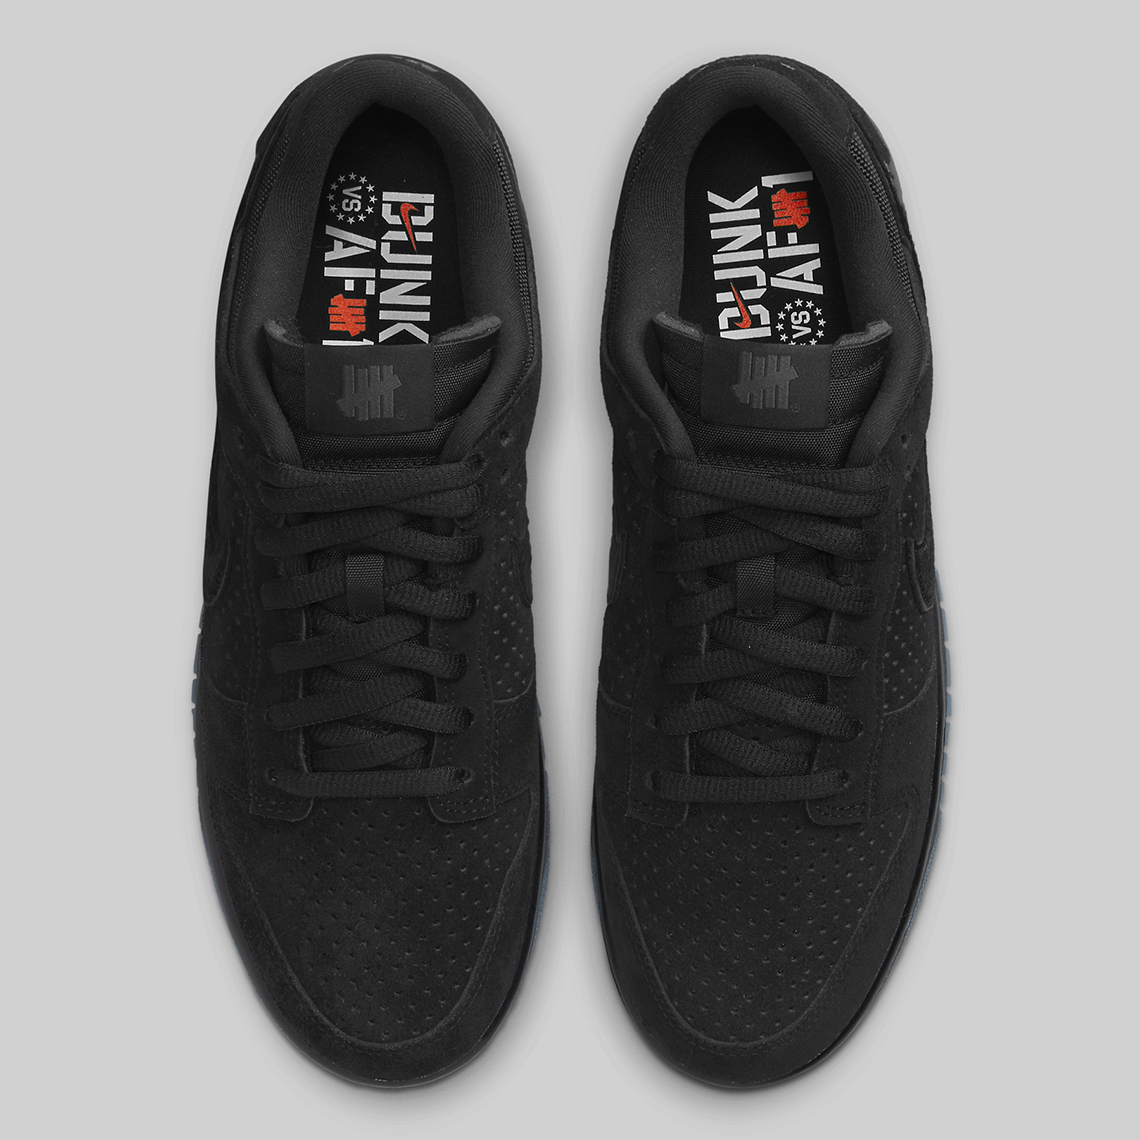 Undefeated Nike undefeated dunk black Dunk Low "Dunk vs. AF-1" DO9329-001 | SneakerNews.com